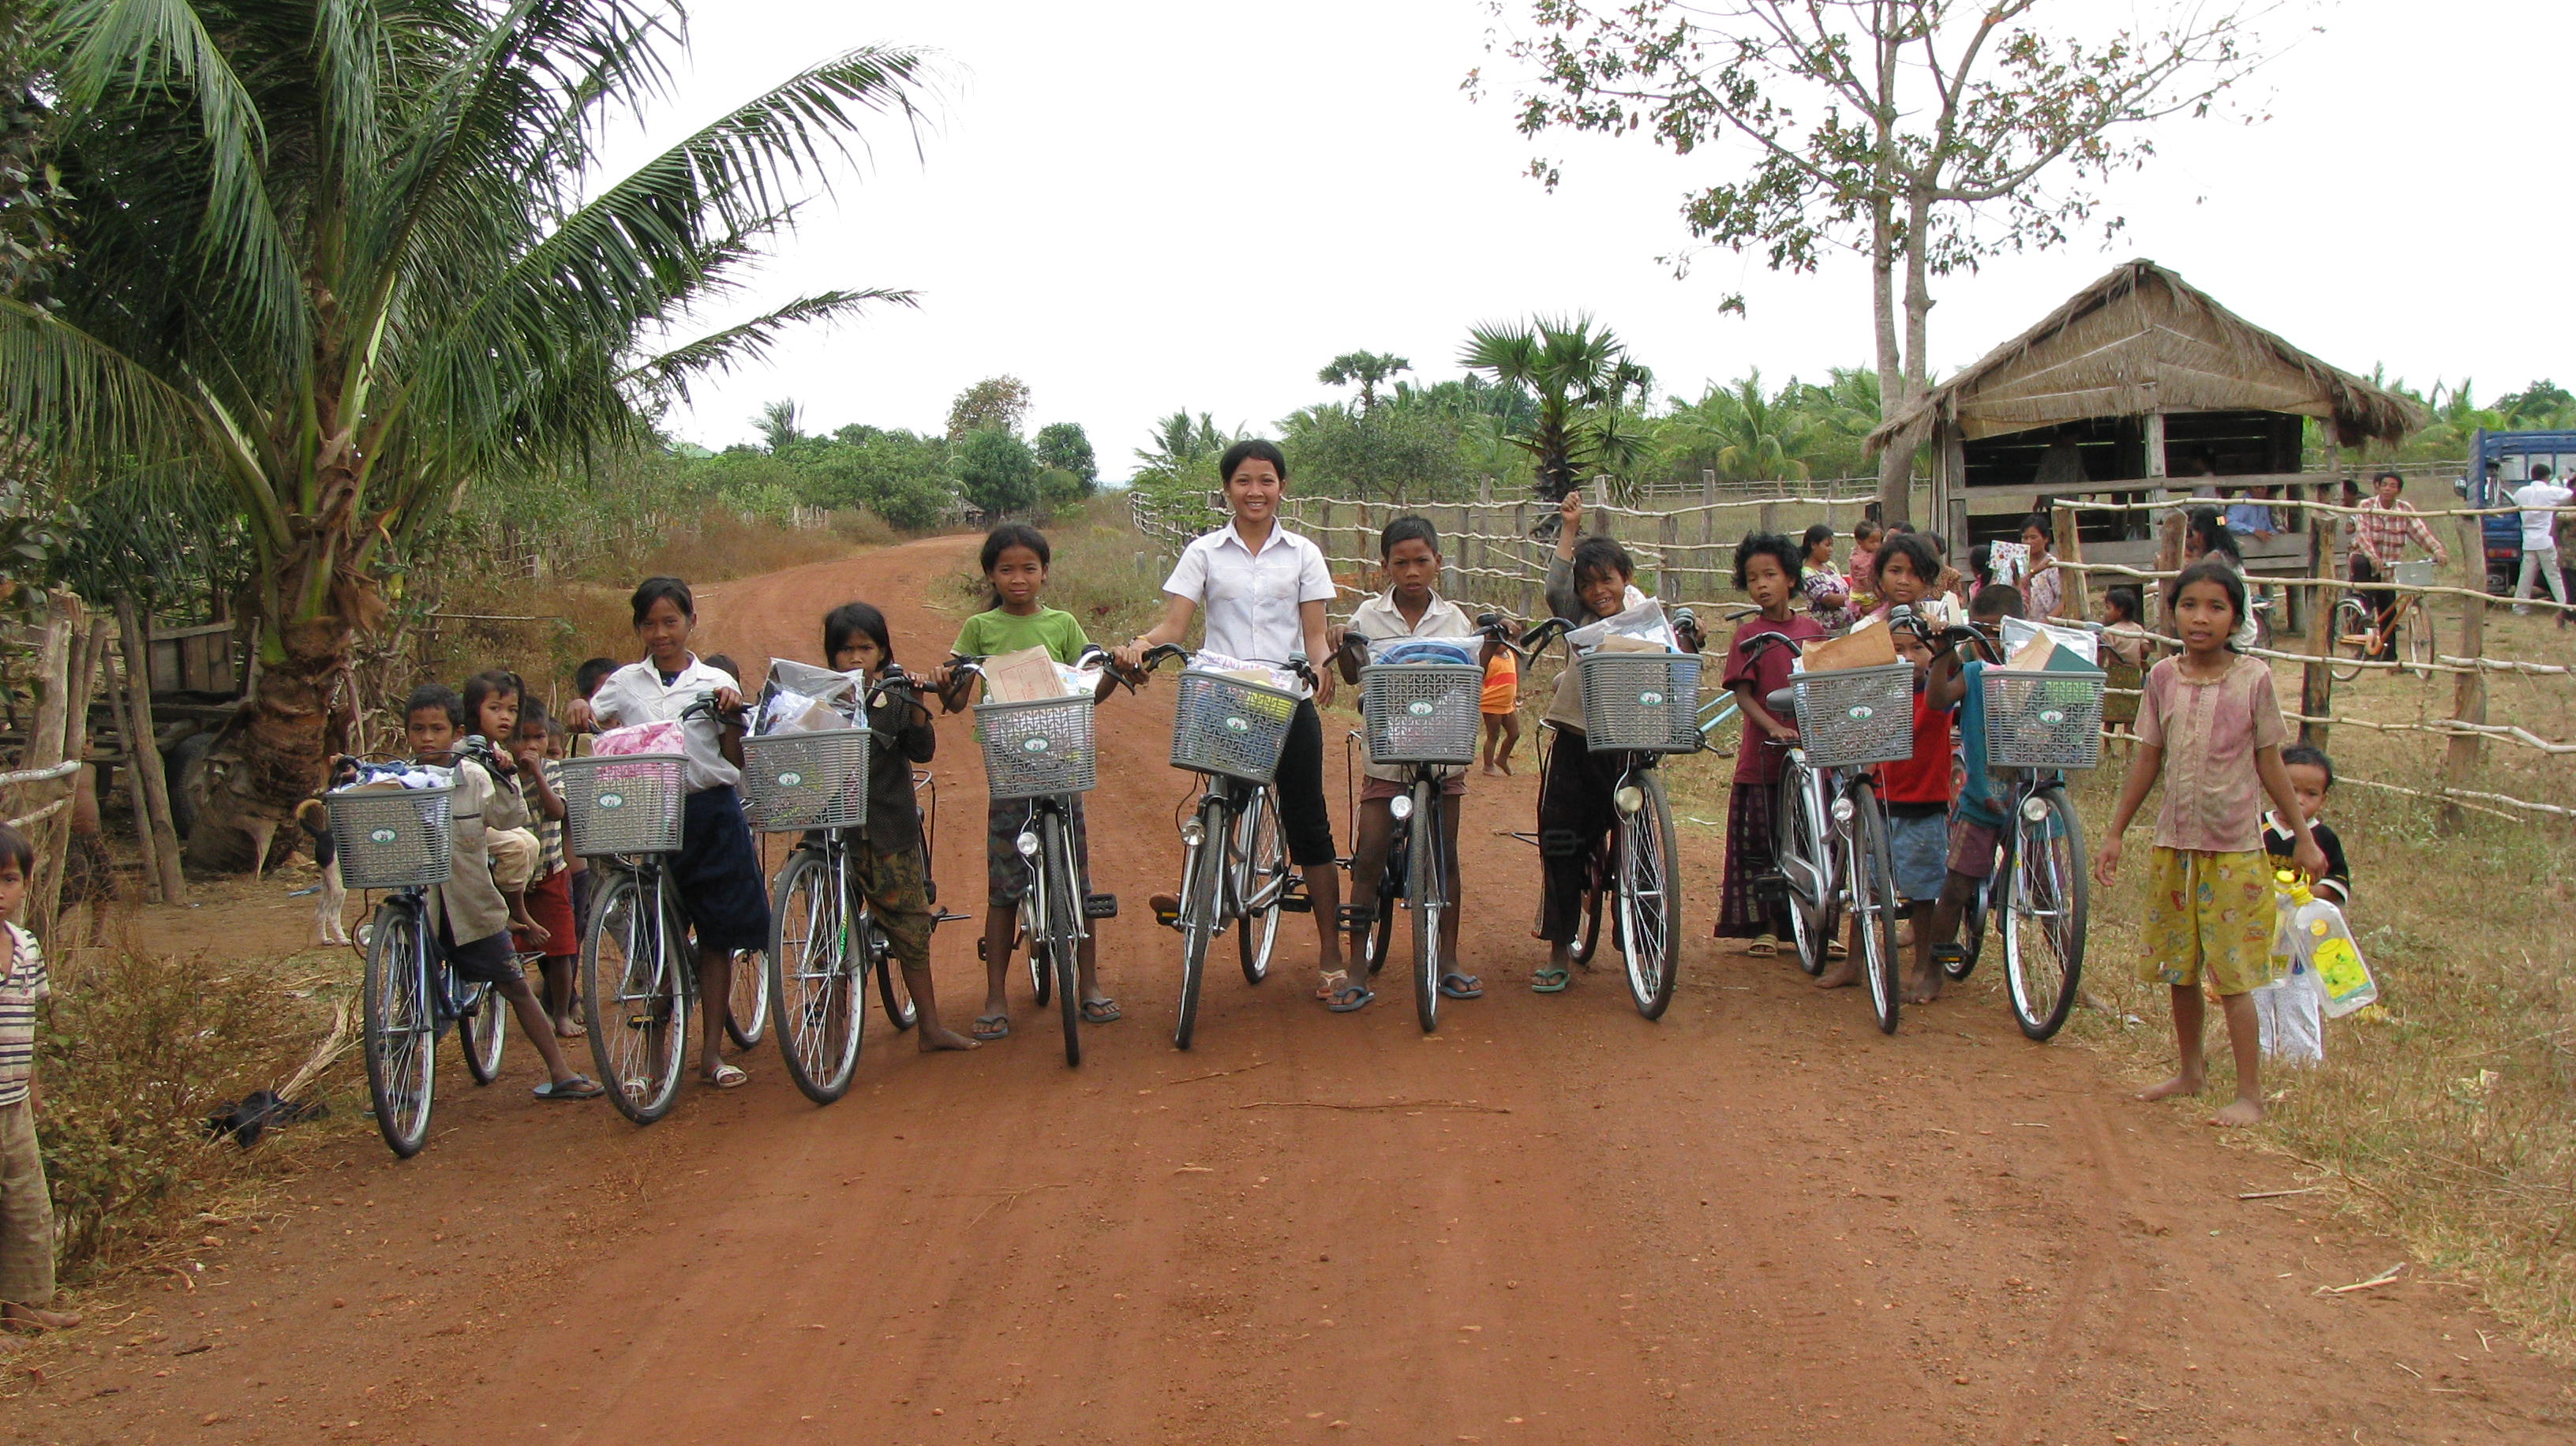 Since split sessions are the rule in Cambodia, most of these children will share a bike with their siblings who have a different session.